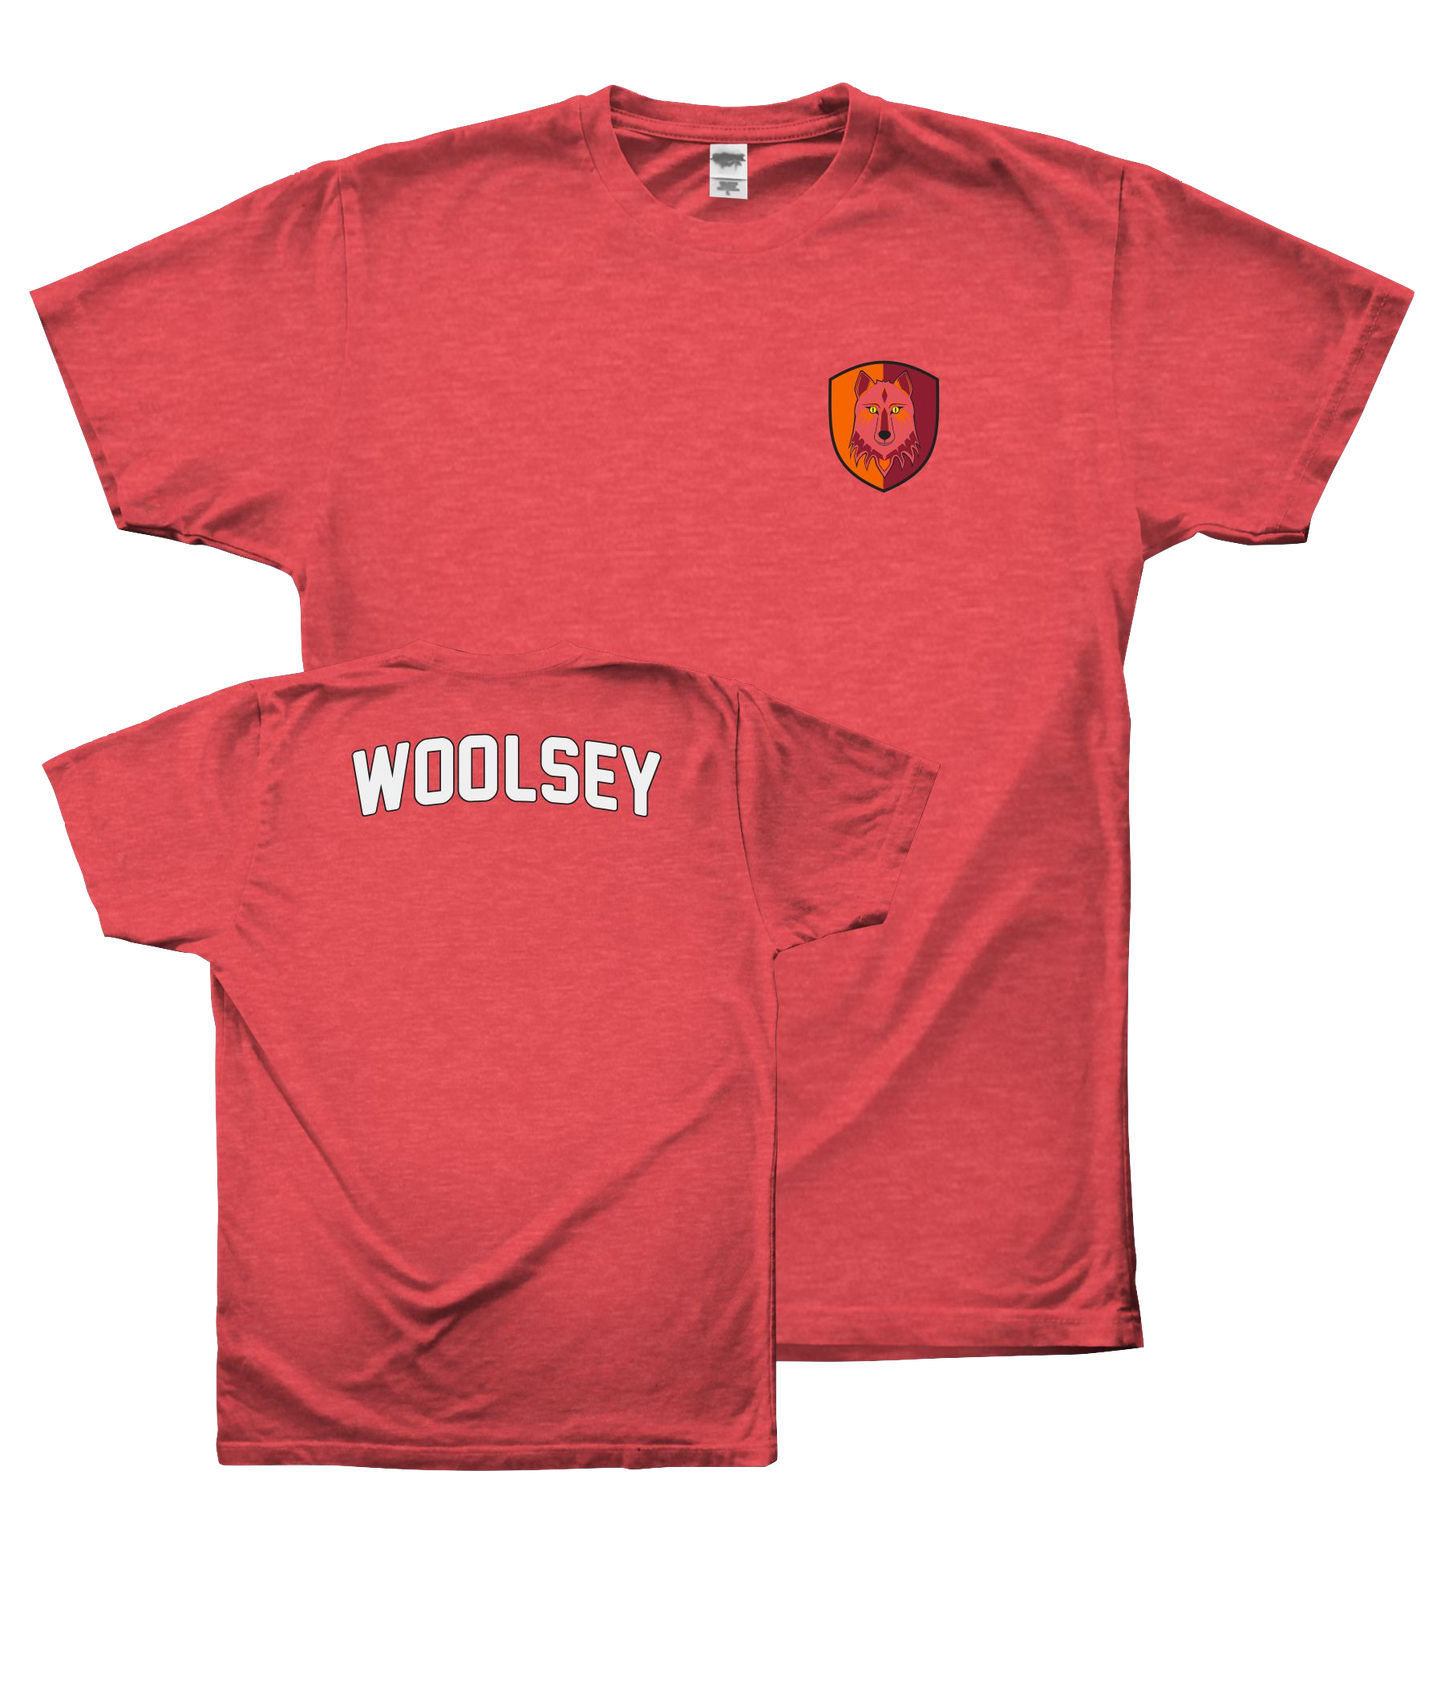 Youth Woolsey Shirt: A